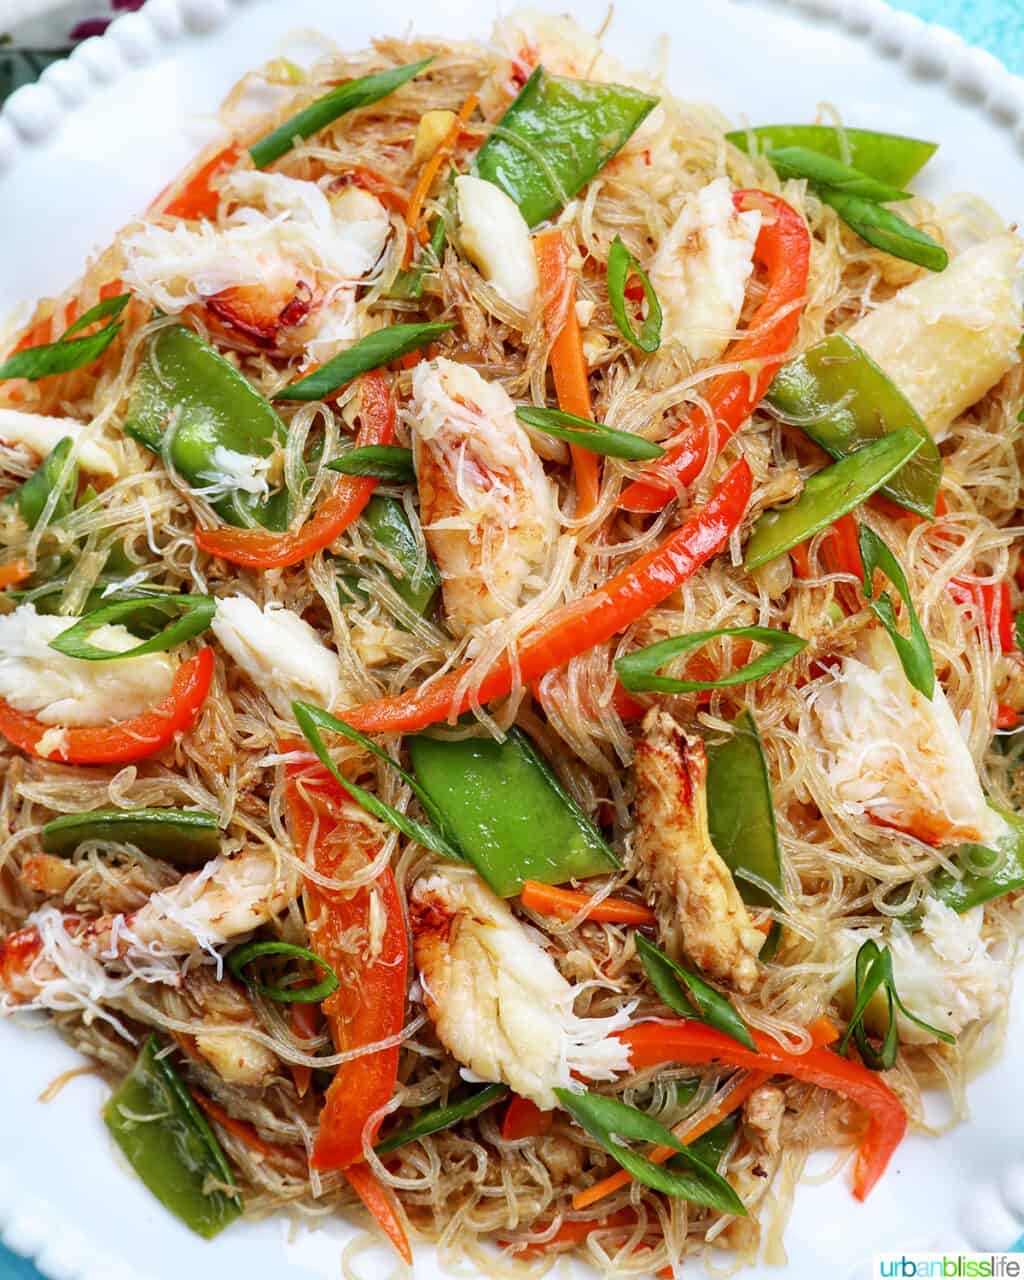 crab pancit filipino noodles in a large bowl, with slices veggies and chunks of crab meat.